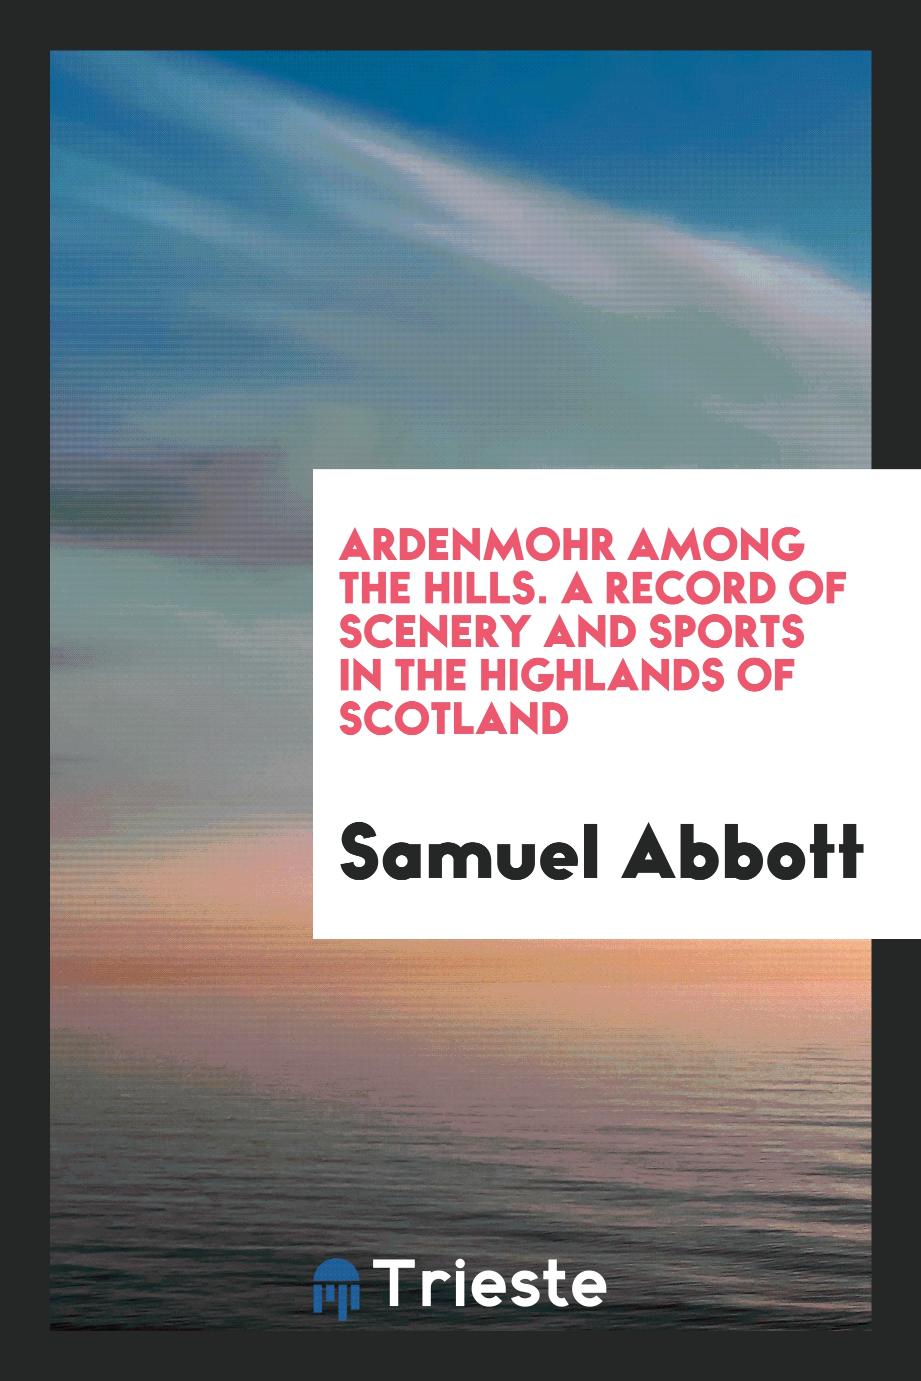 Ardenmohr among the hills. A record of scenery and sports in the Highlands of Scotland